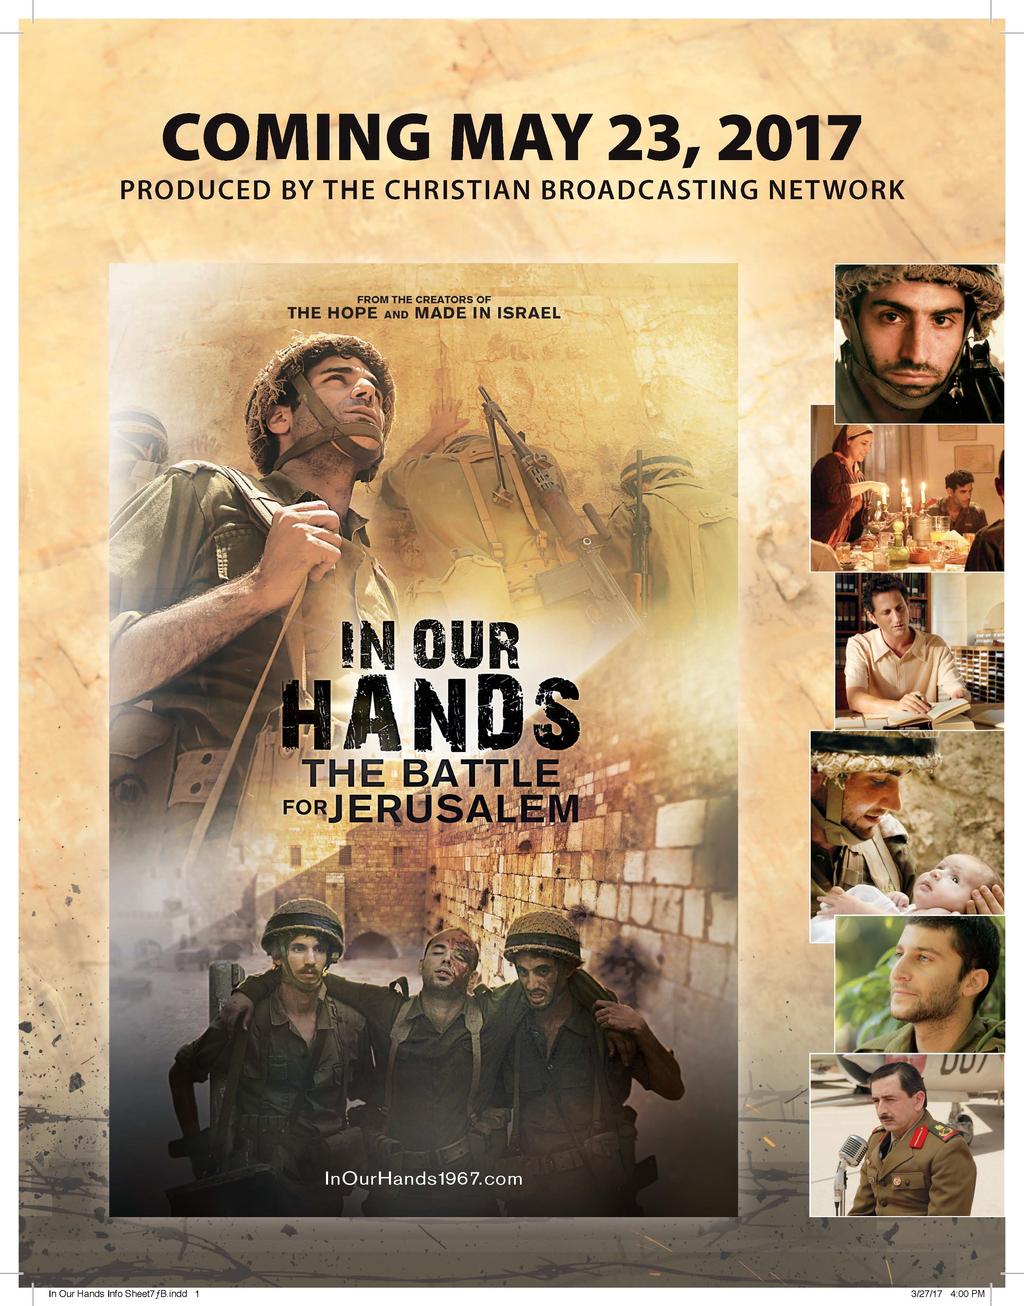 One night only! May 23rd at 7:00 pm Join the dat minyan at the Aurora 16 Theater (14300 E.